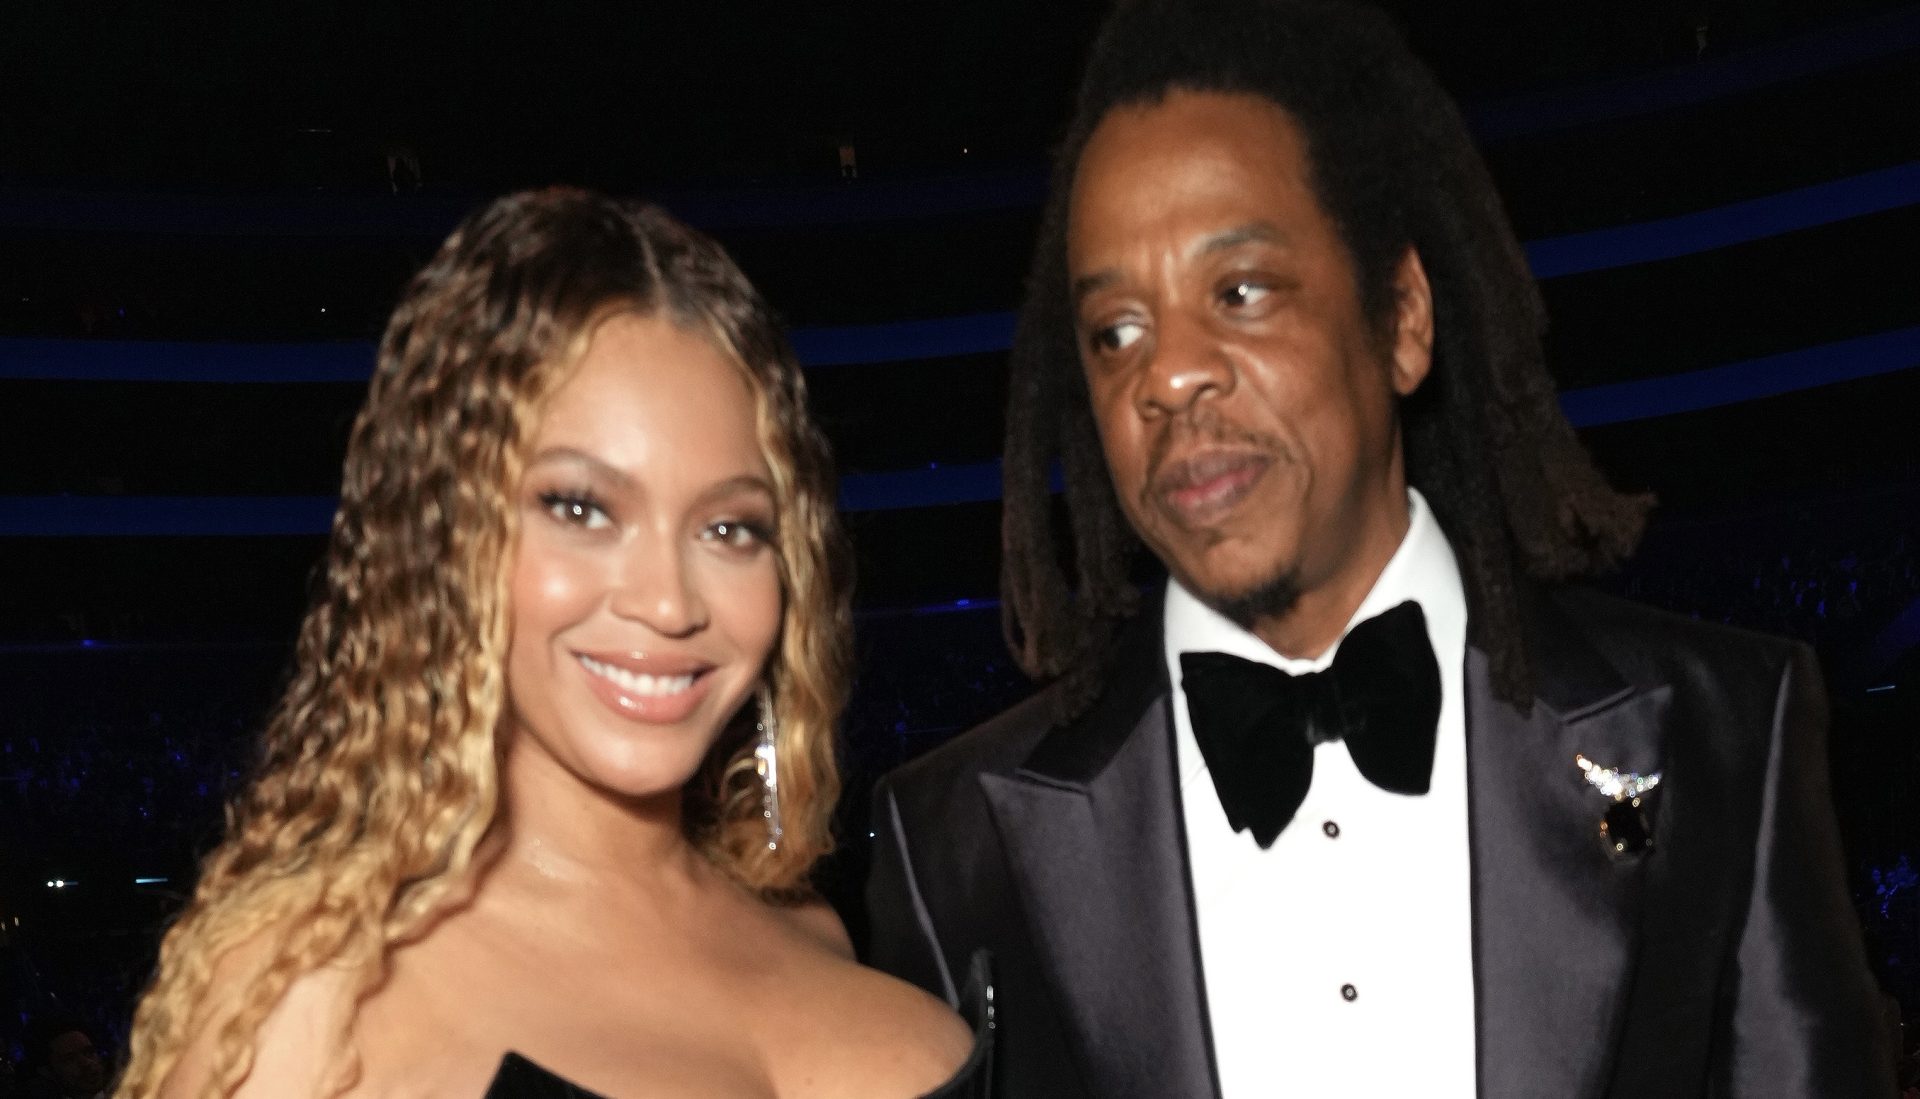 Livin’ Large! Beyoncé & Jay-Z Reportedly Drop $200M To Buy Priciest Home Ever Sold In California